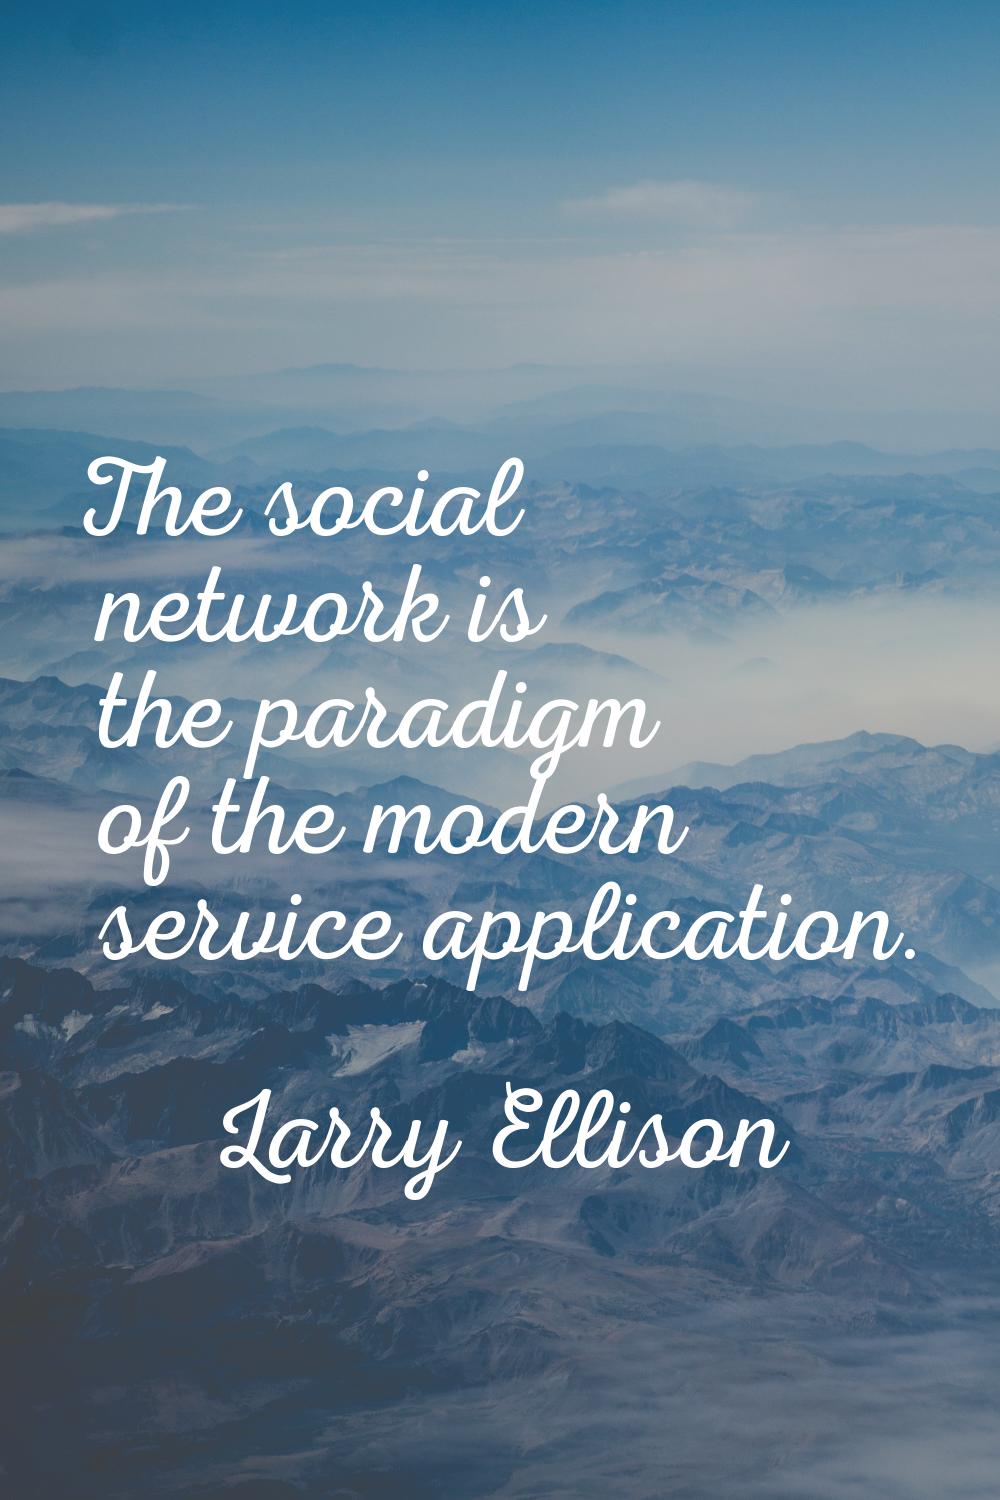 The social network is the paradigm of the modern service application.